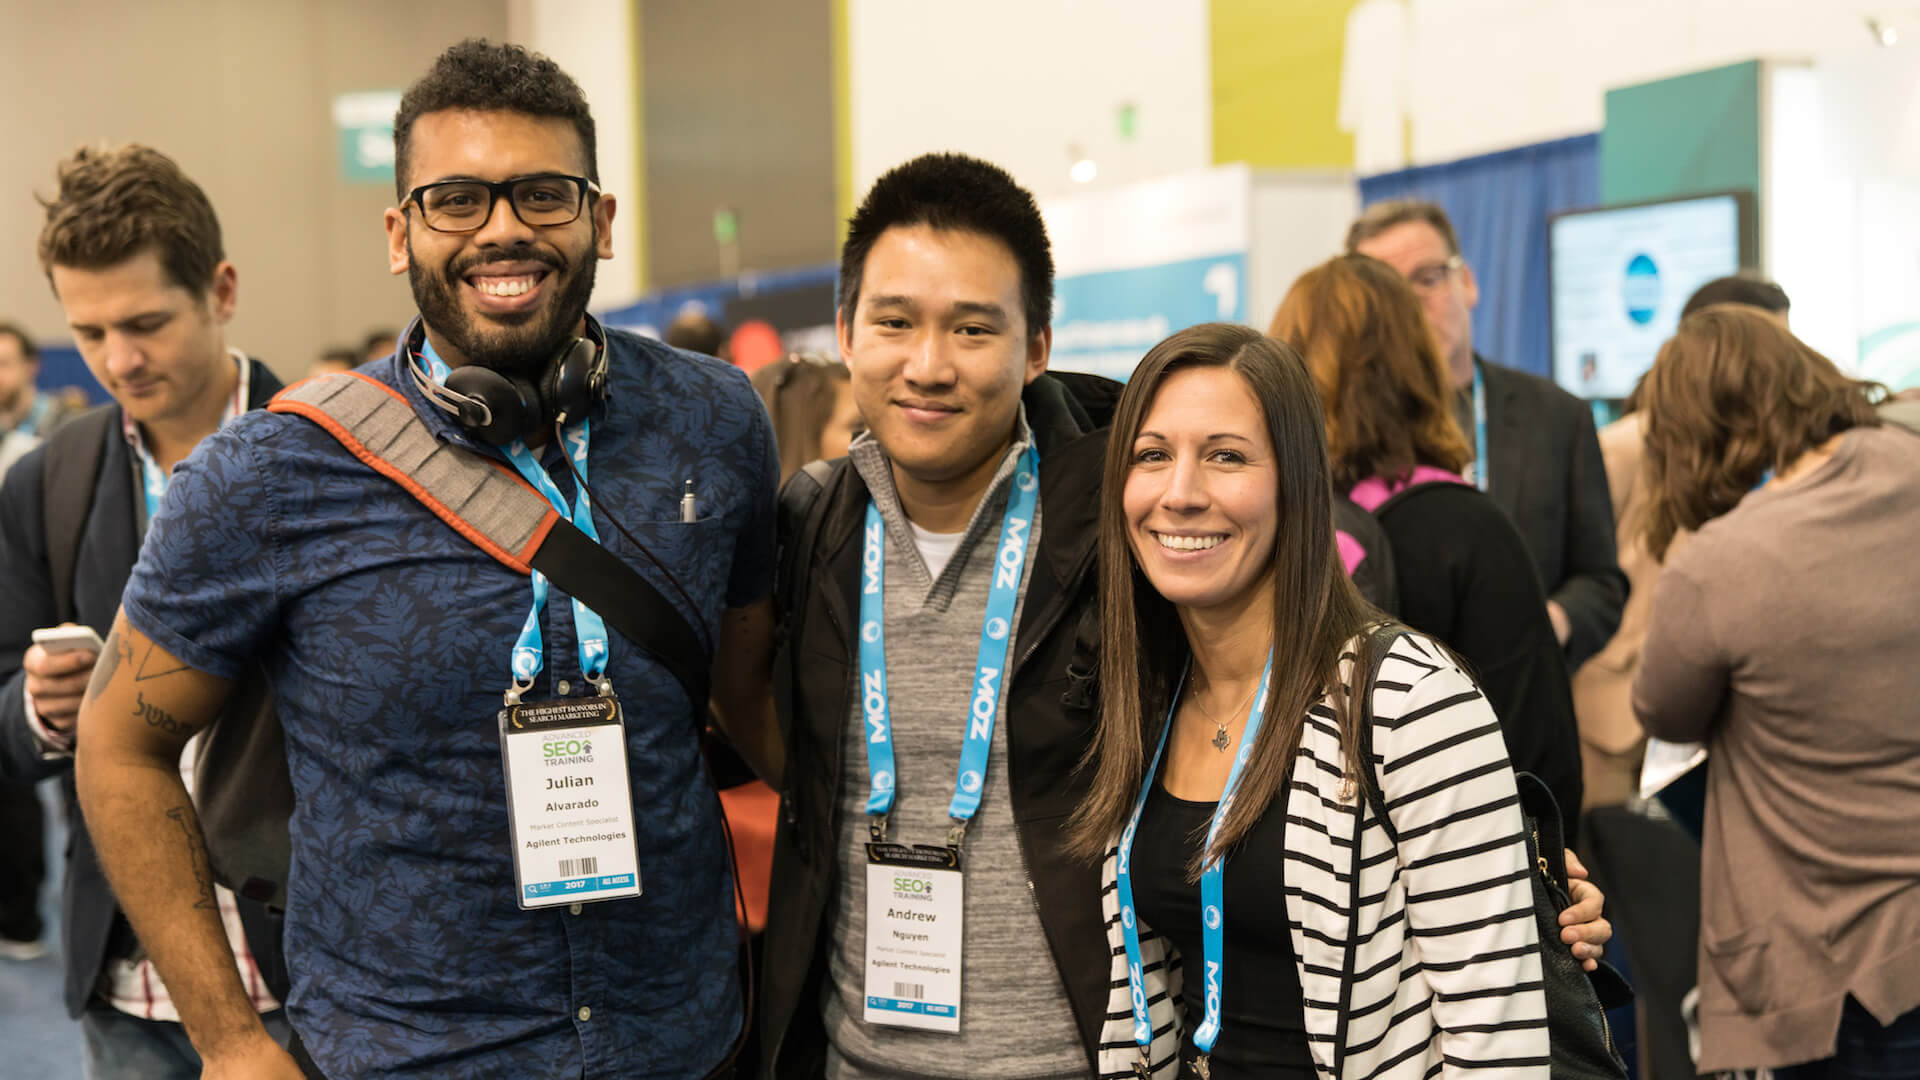 Successful teams attend SMX East